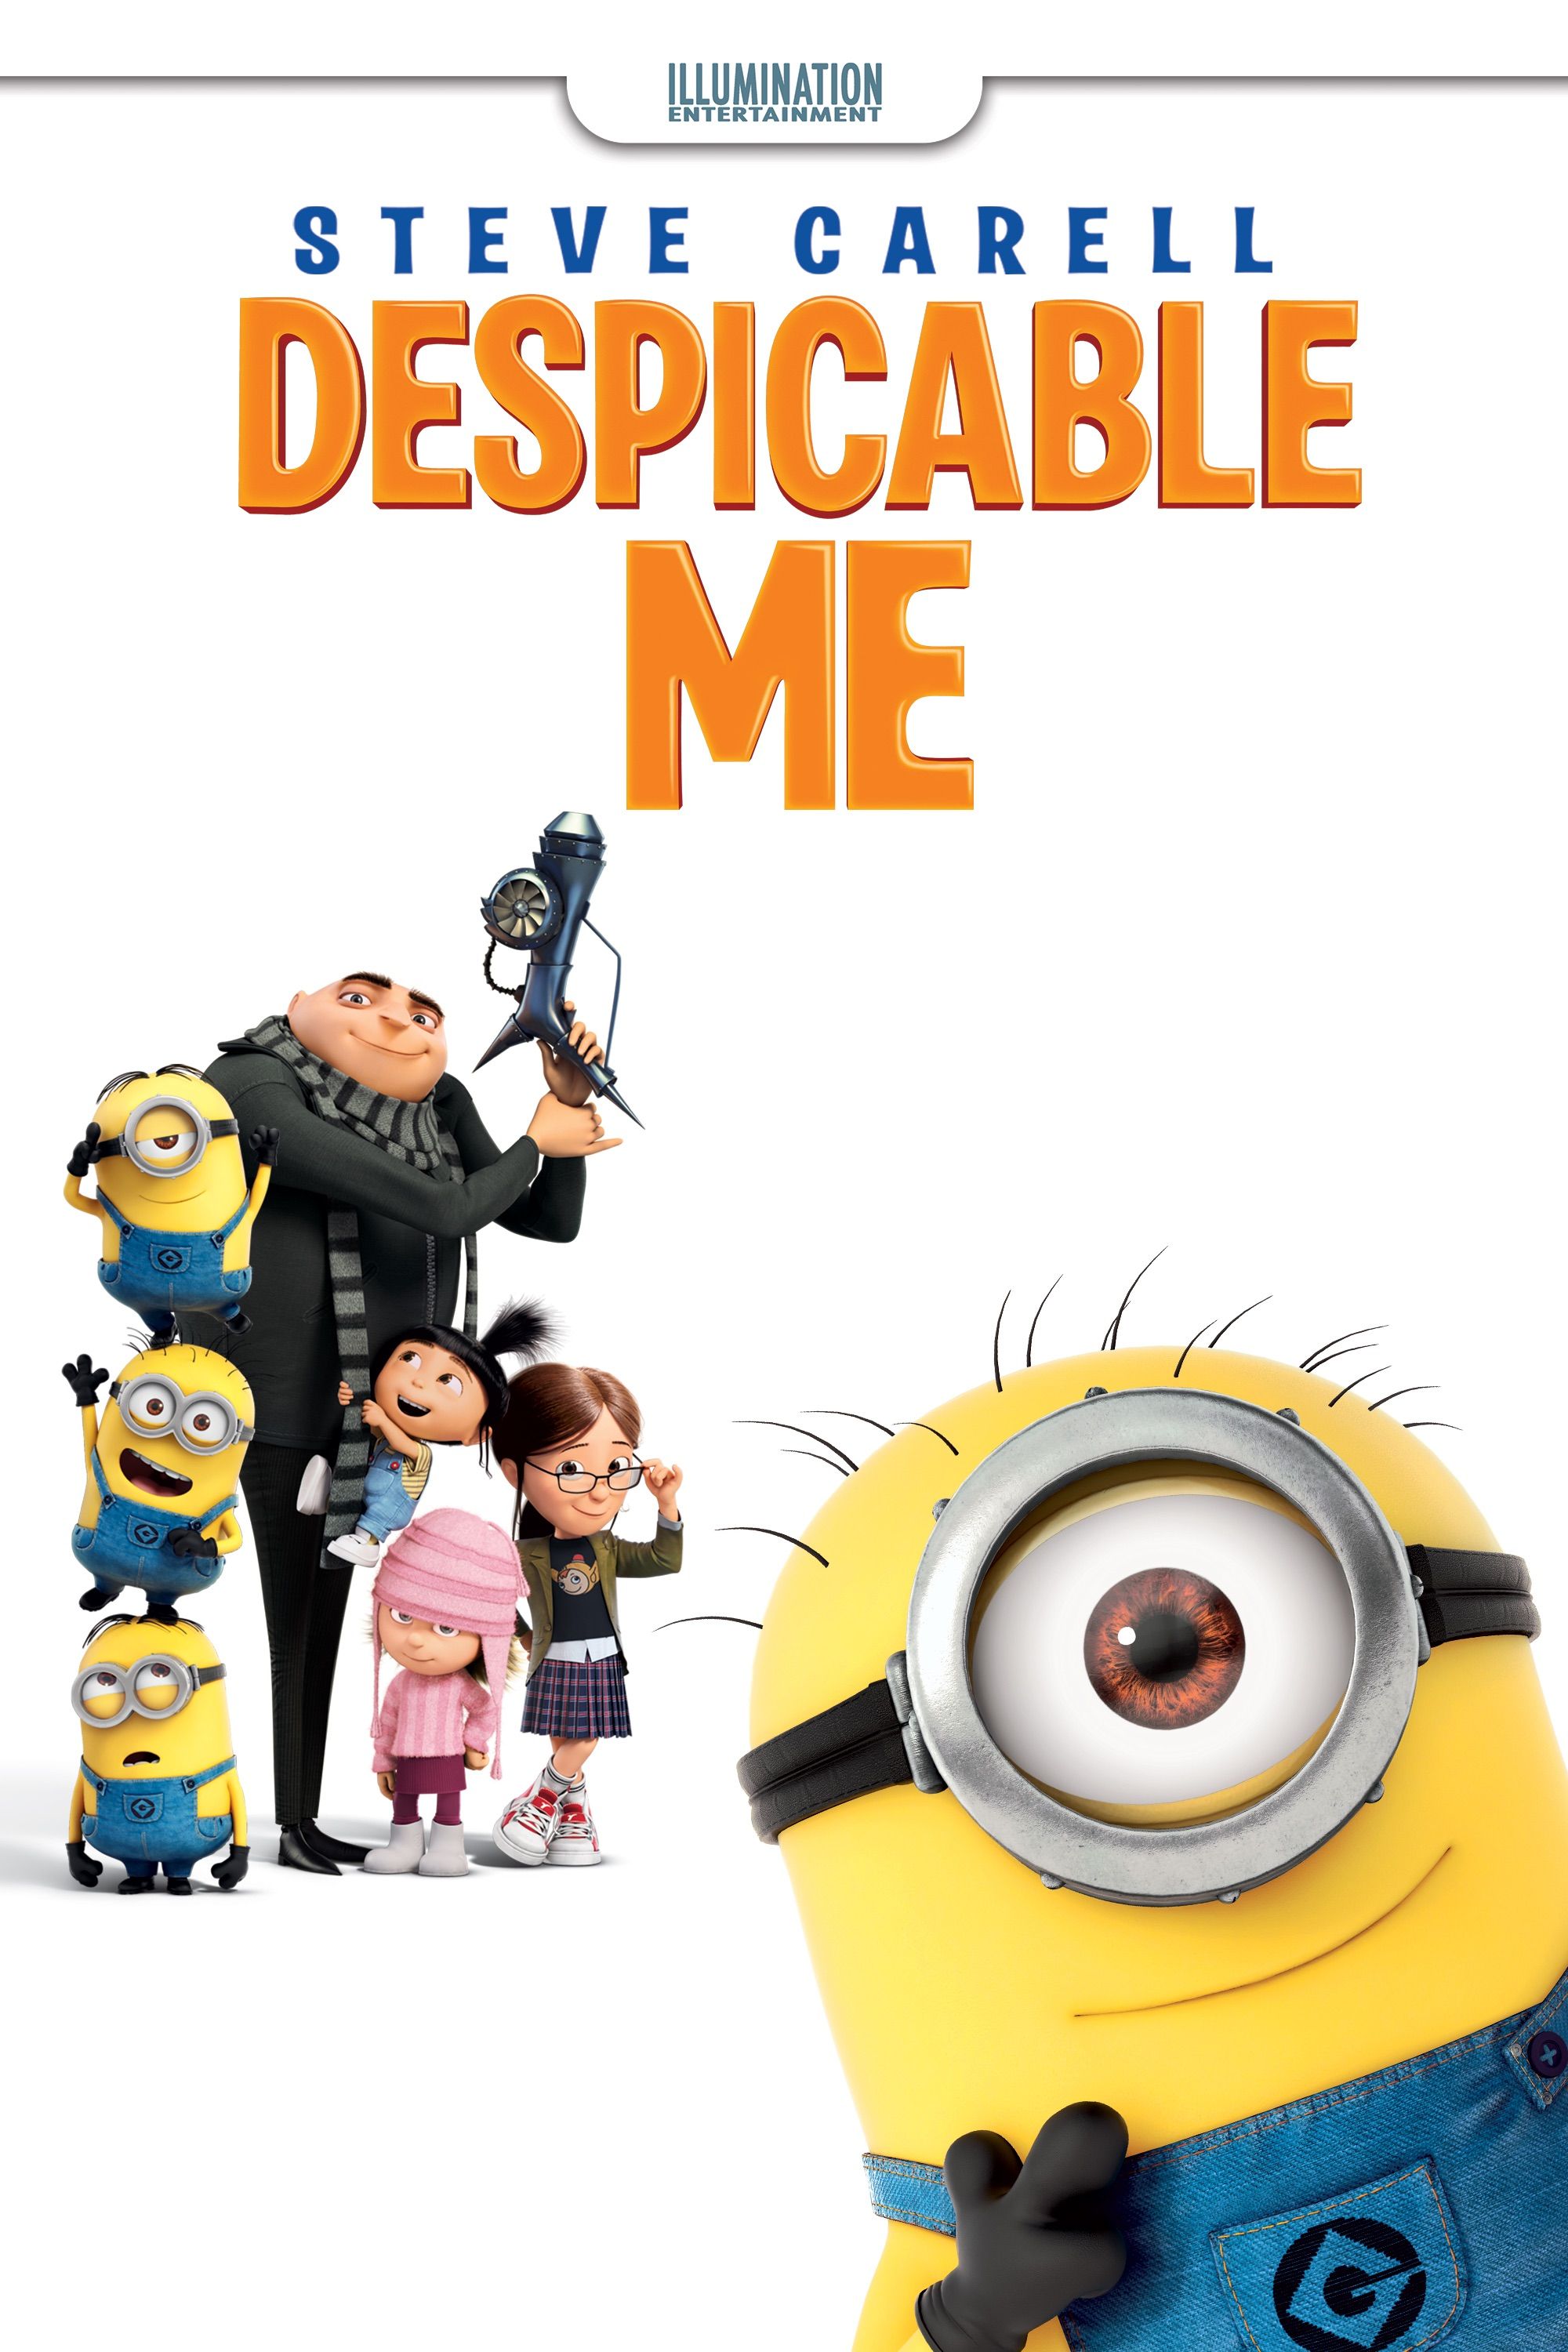 despicable 1 full movie online